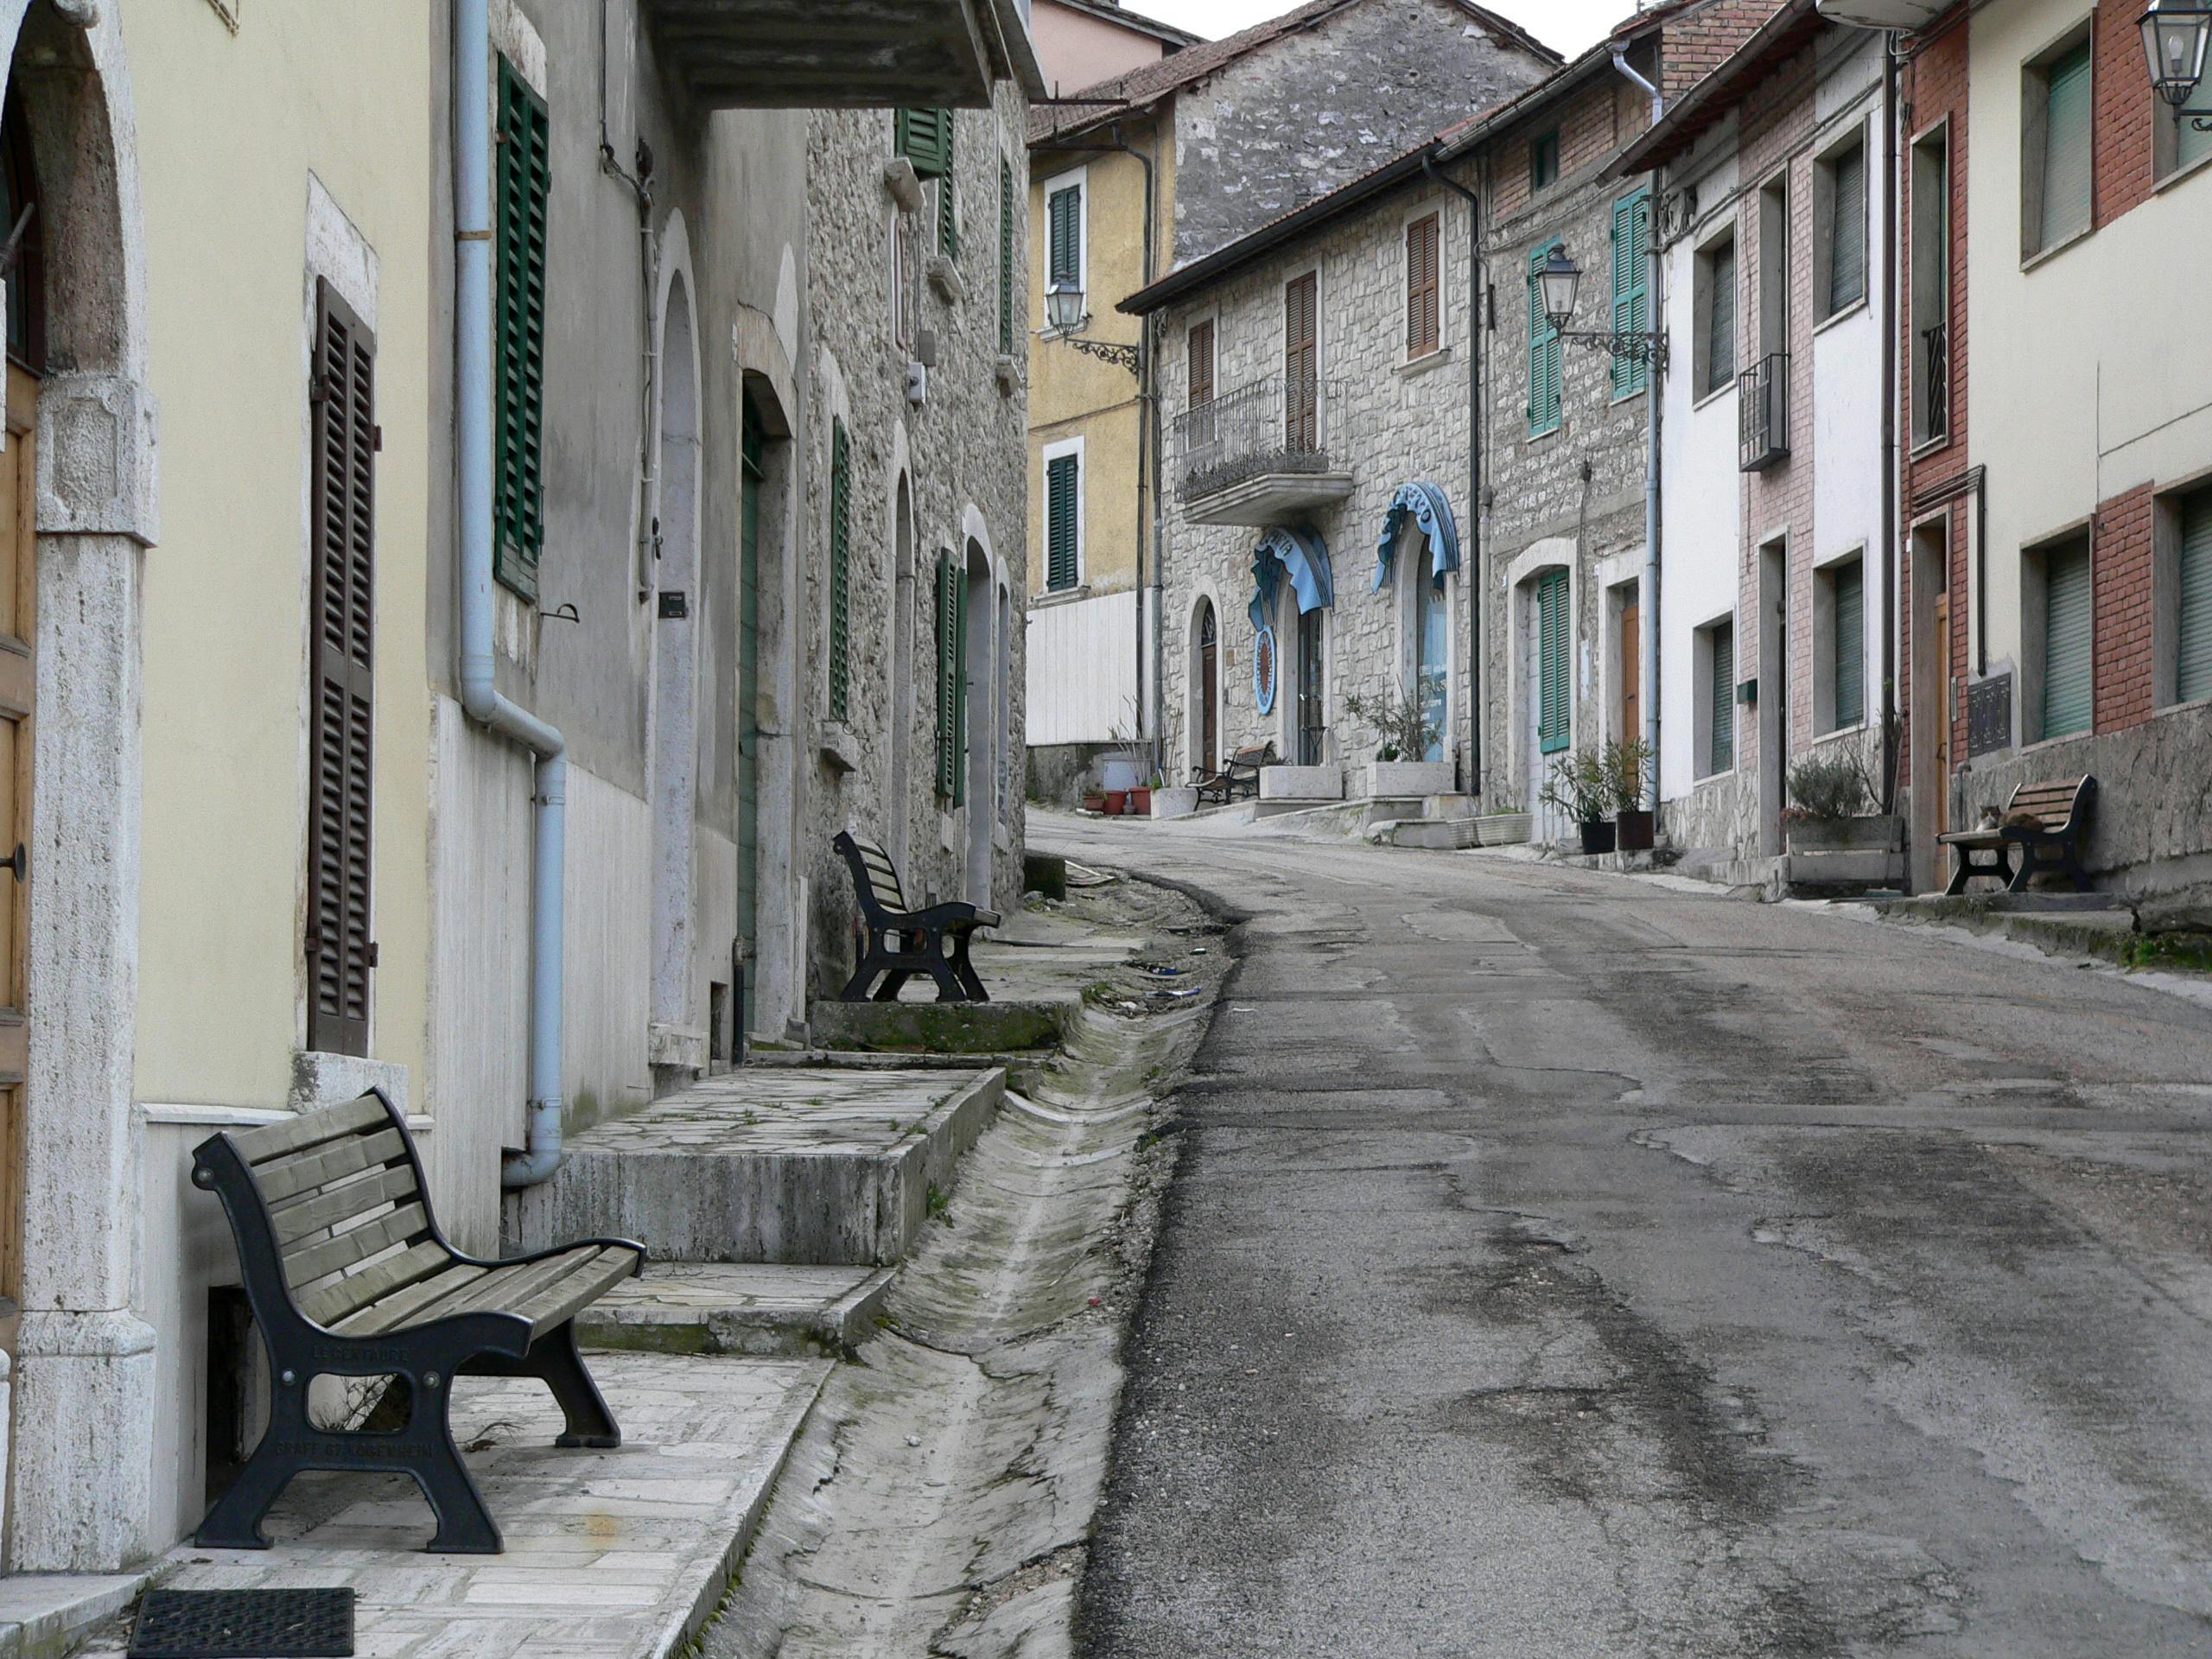 a street with benches and a bench on the side